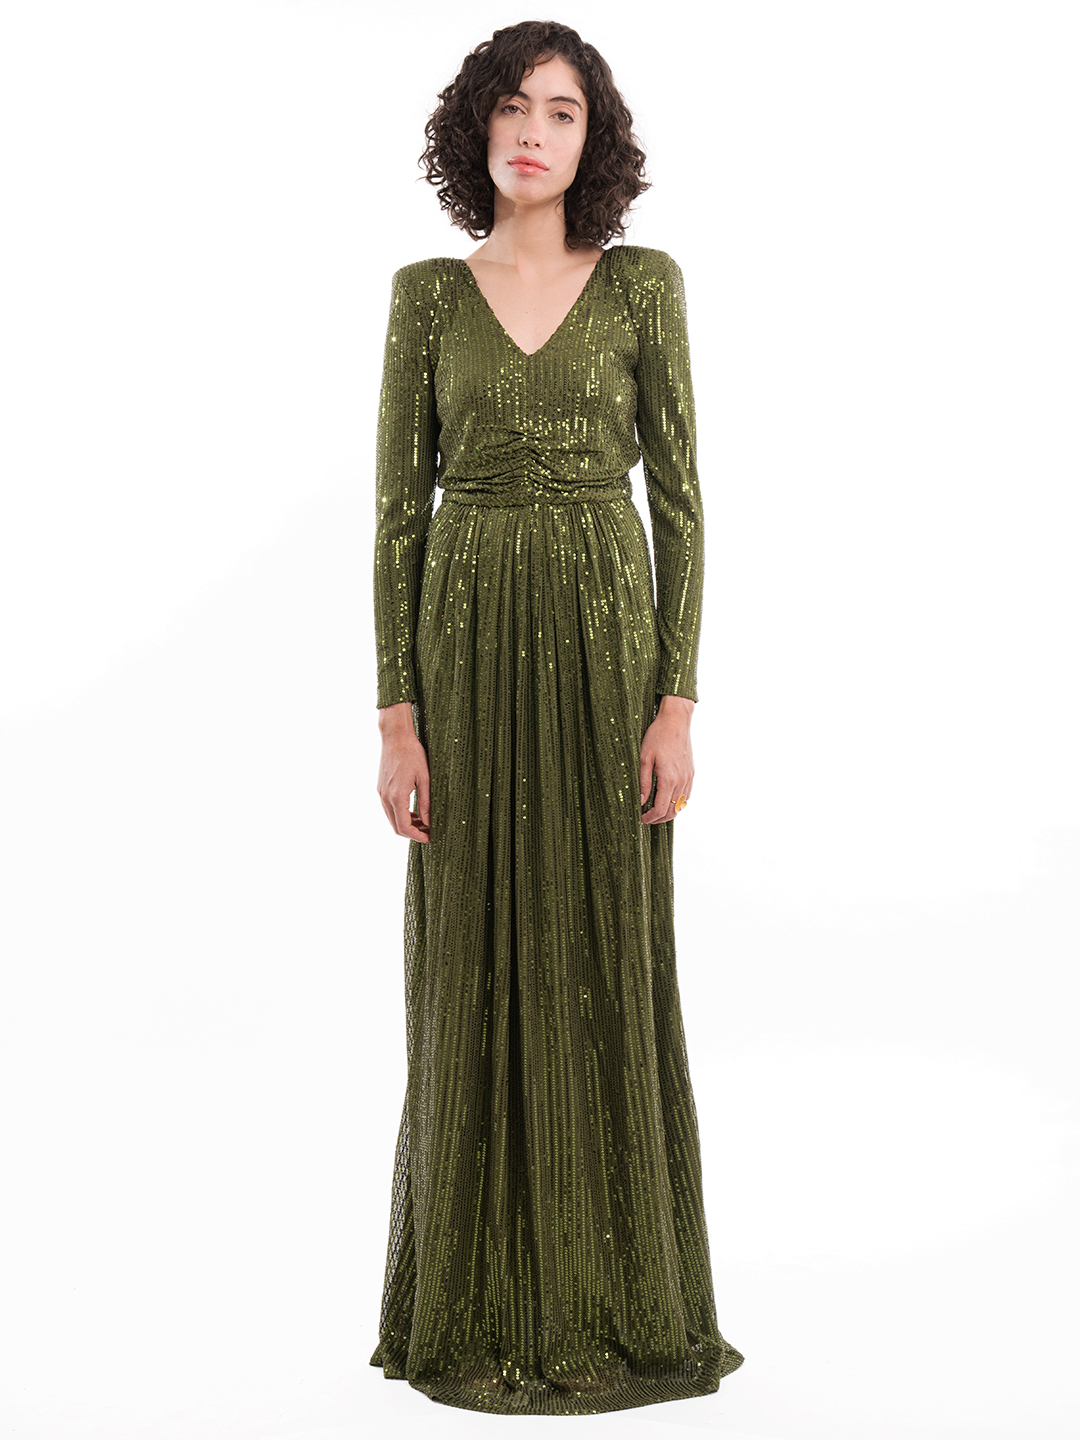 Dazzle In Divine Olive Dress - Front